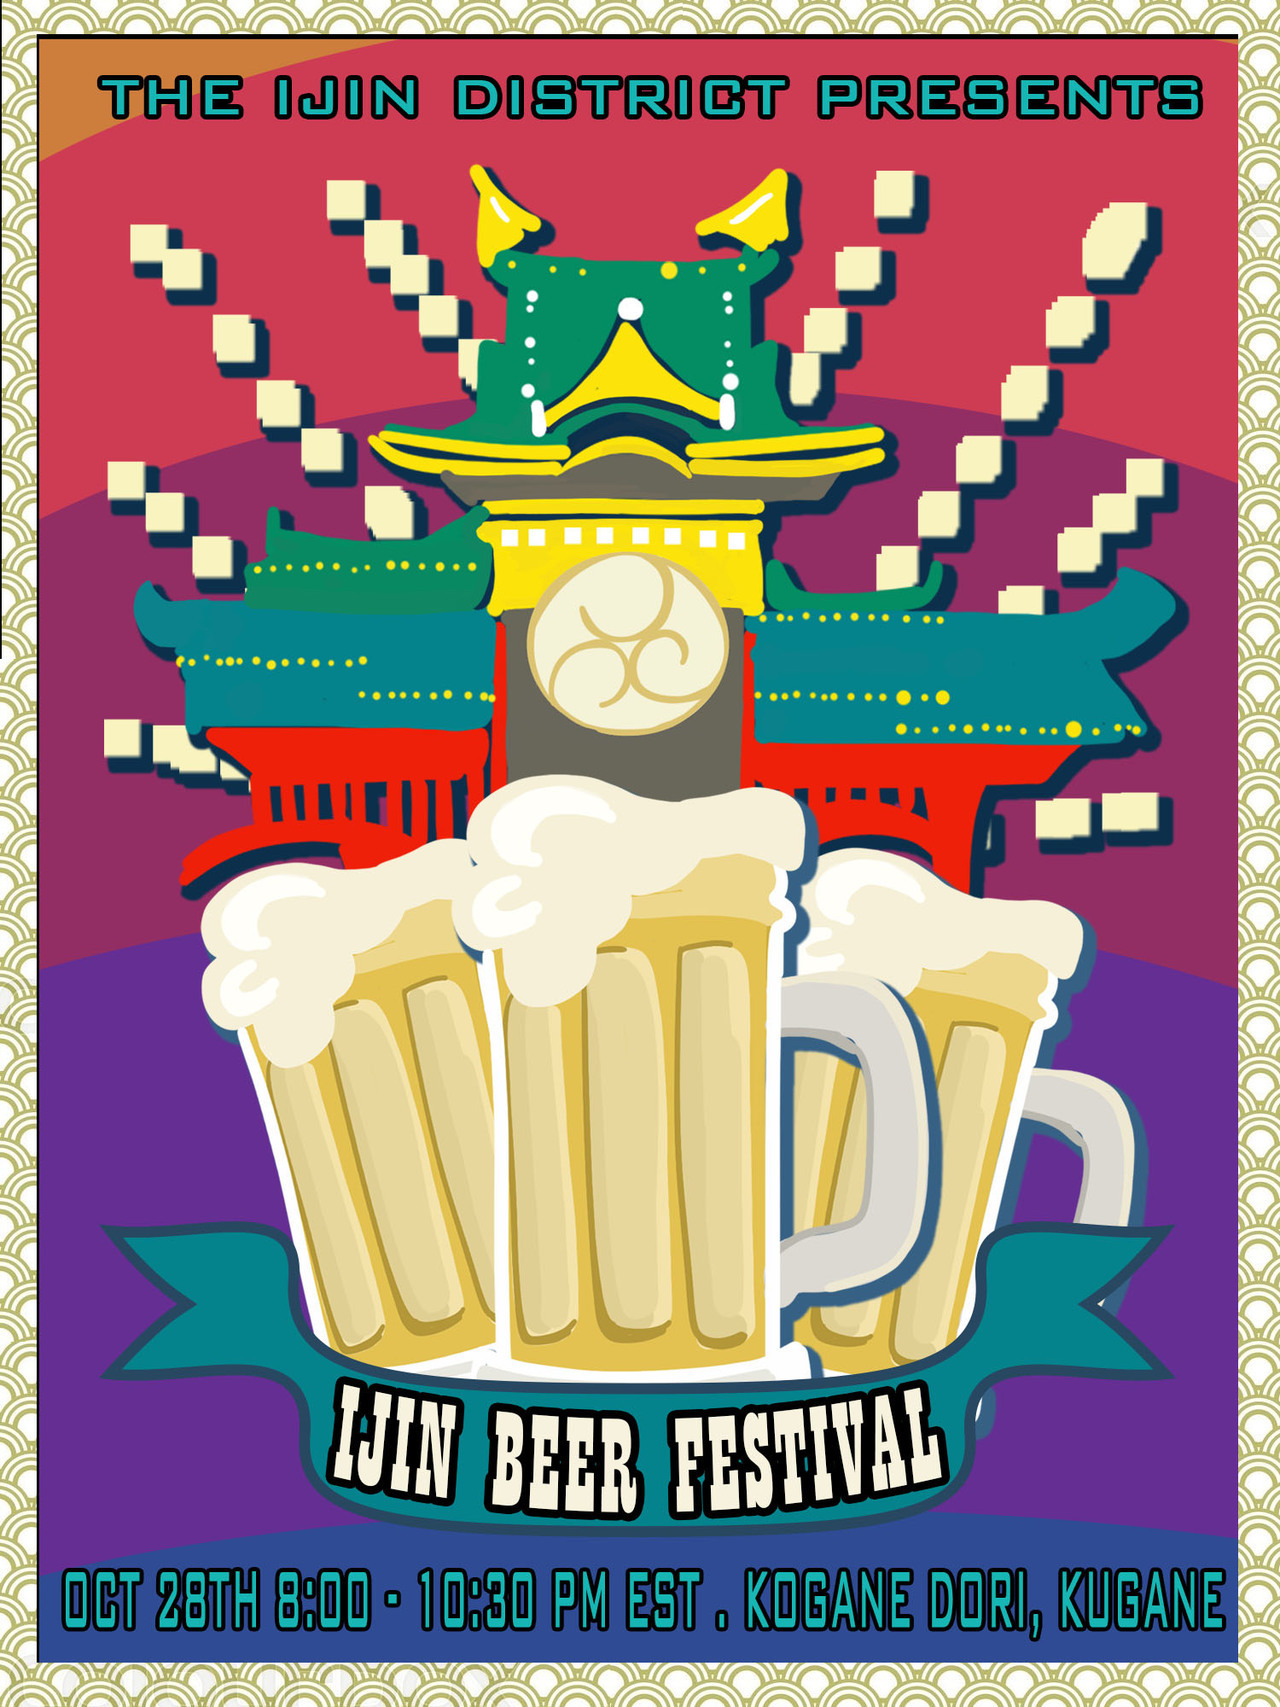 [Balmung] Ijin Beer Festival
Oct 28th 8:00 - 10:30pm EST - Kogane Dori, KuganeLOOKING FOR VENDORS:
https://discord.gg/vxFzhk8
The Ijin Beer Festival is set up by the Ijin District of Kugane to celebrate local and foreign beer, ale, and spirit vendors...